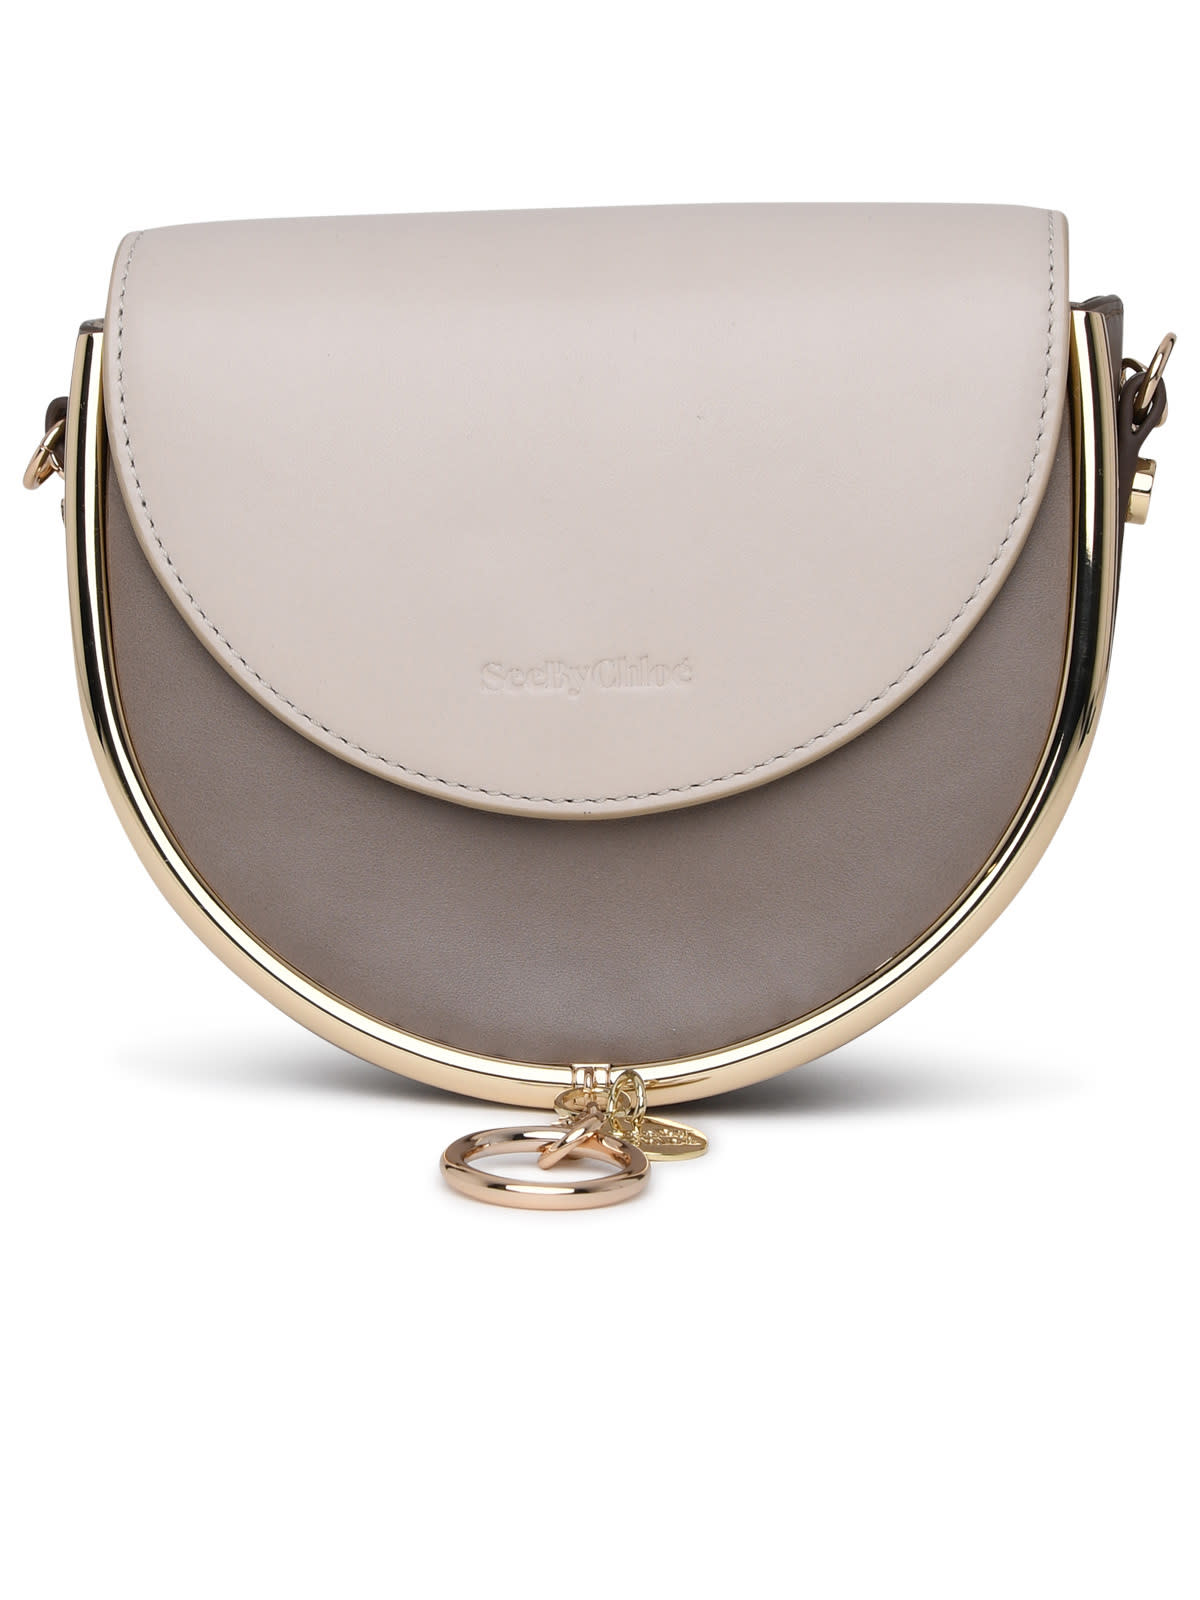 SEE BY CHLOÉ SMALL LEATHER MARA SHOULDER BAG